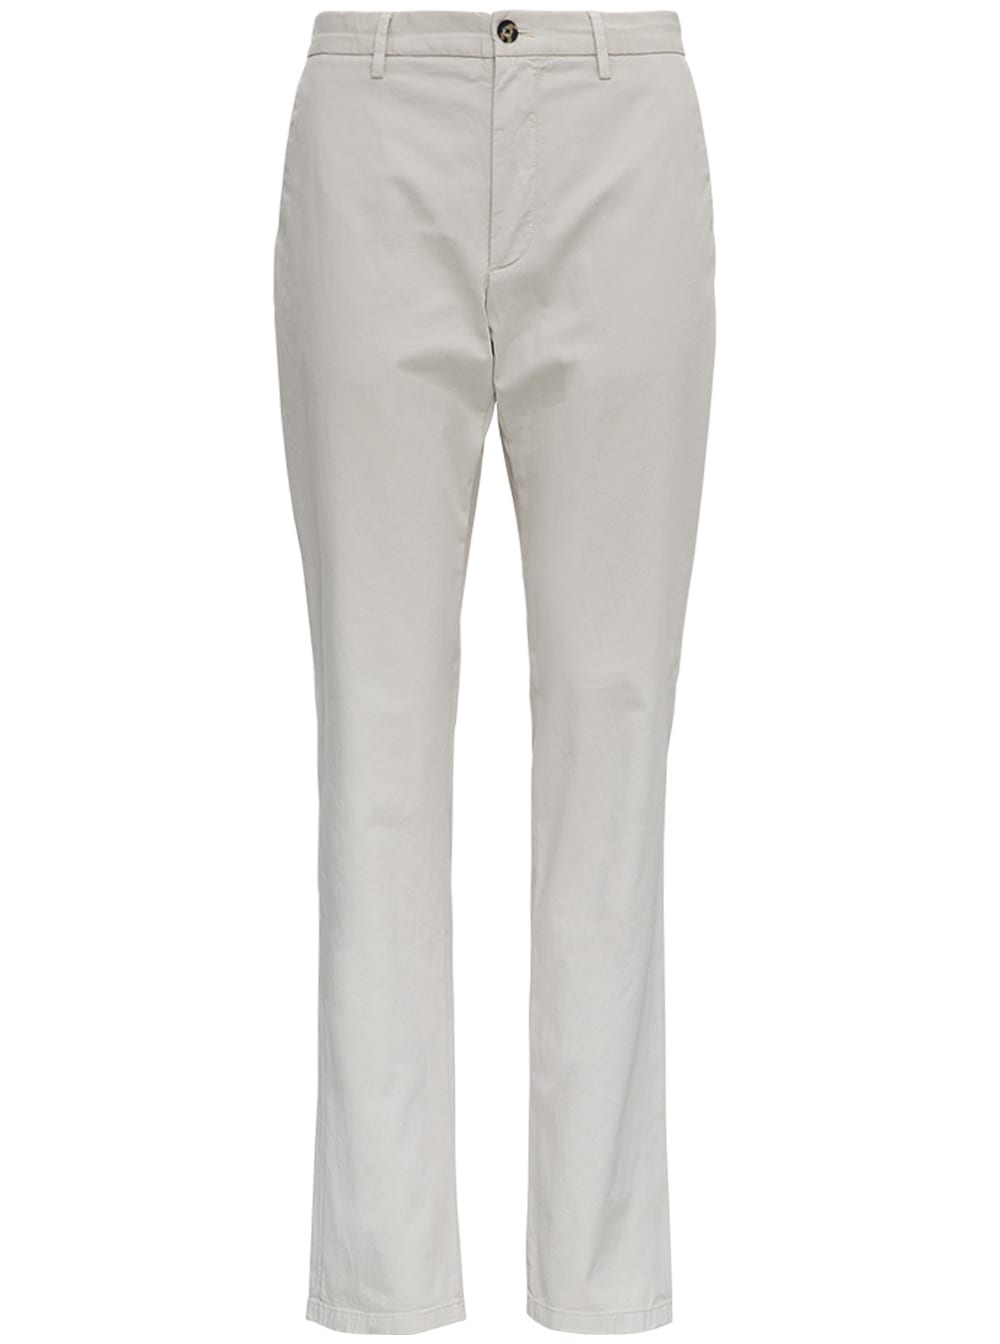 Z Zegna Ivory-colored Cotton Tailored Trousers